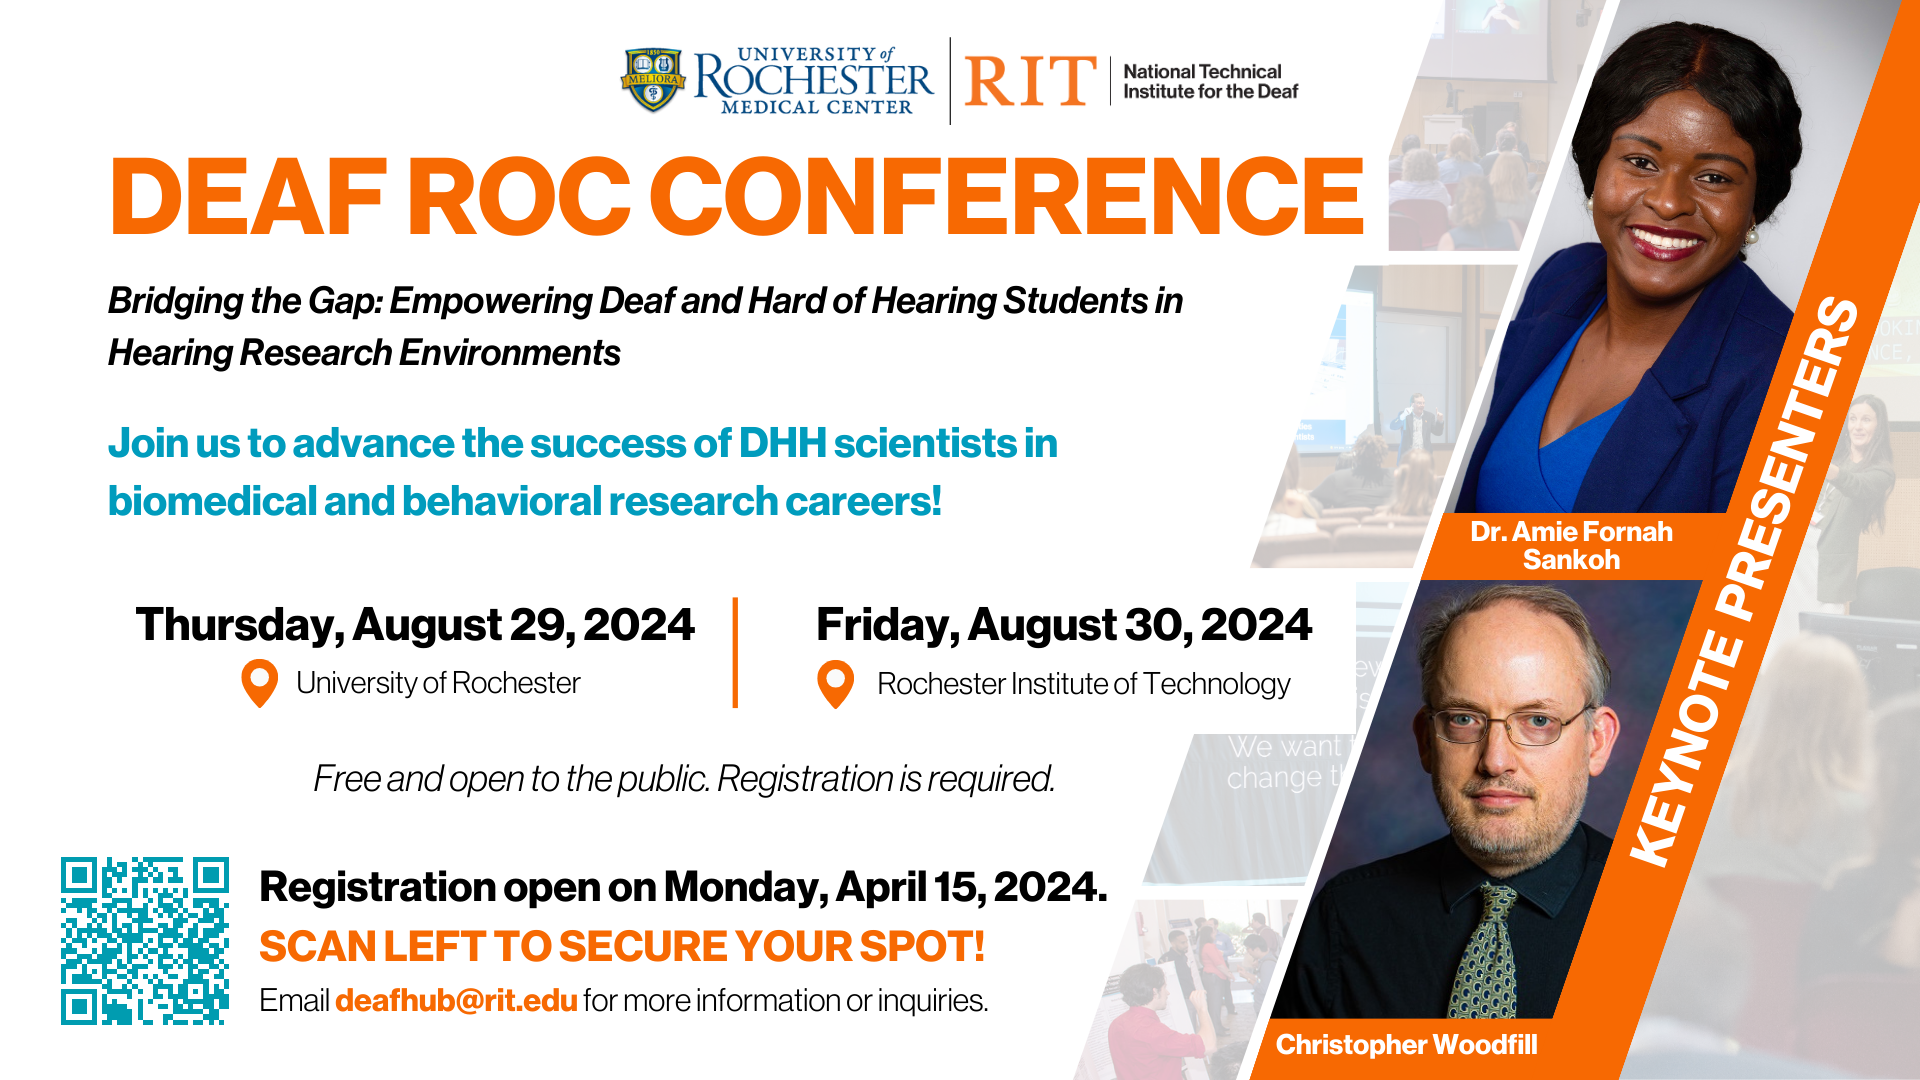 Deaf ROC conference features two keynote presenters, Dr. Amie Fornah Sankoh and Christopher Woodfill on Friday, August 30, 2024.